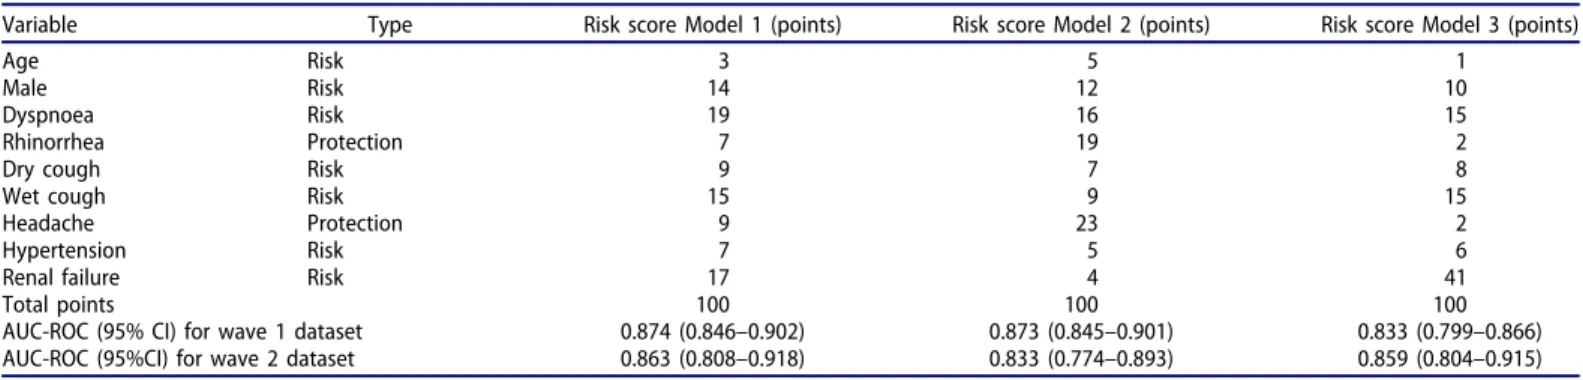 Table 6. Risk score models and the respective area under the receiver operating characteristic curve (AUC-ROC) with 95% confi- confi-dence interval.